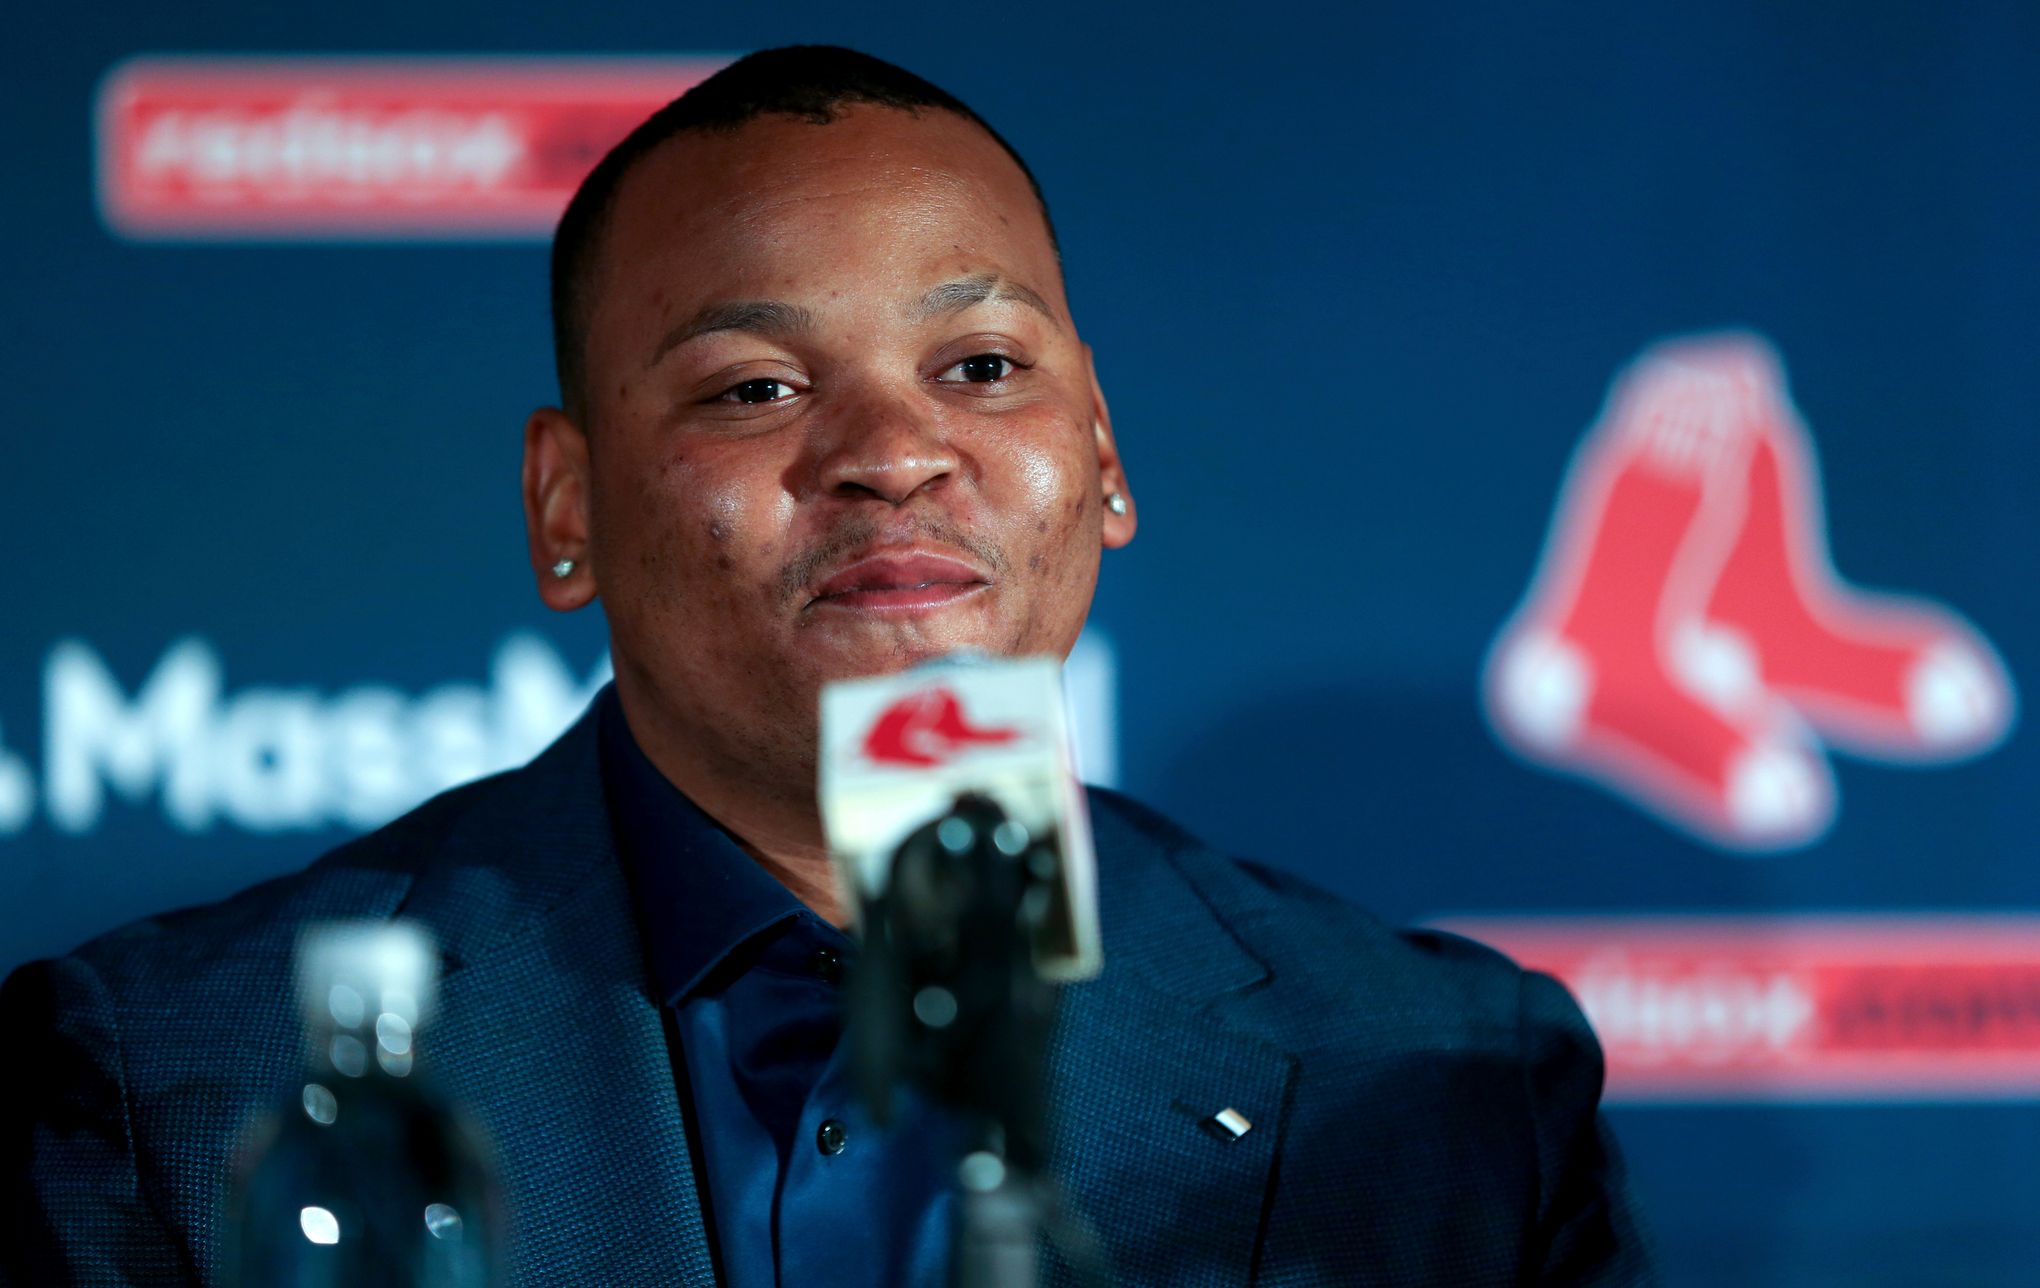 I'm taking some time for myself:' Rafael Devers explains his new